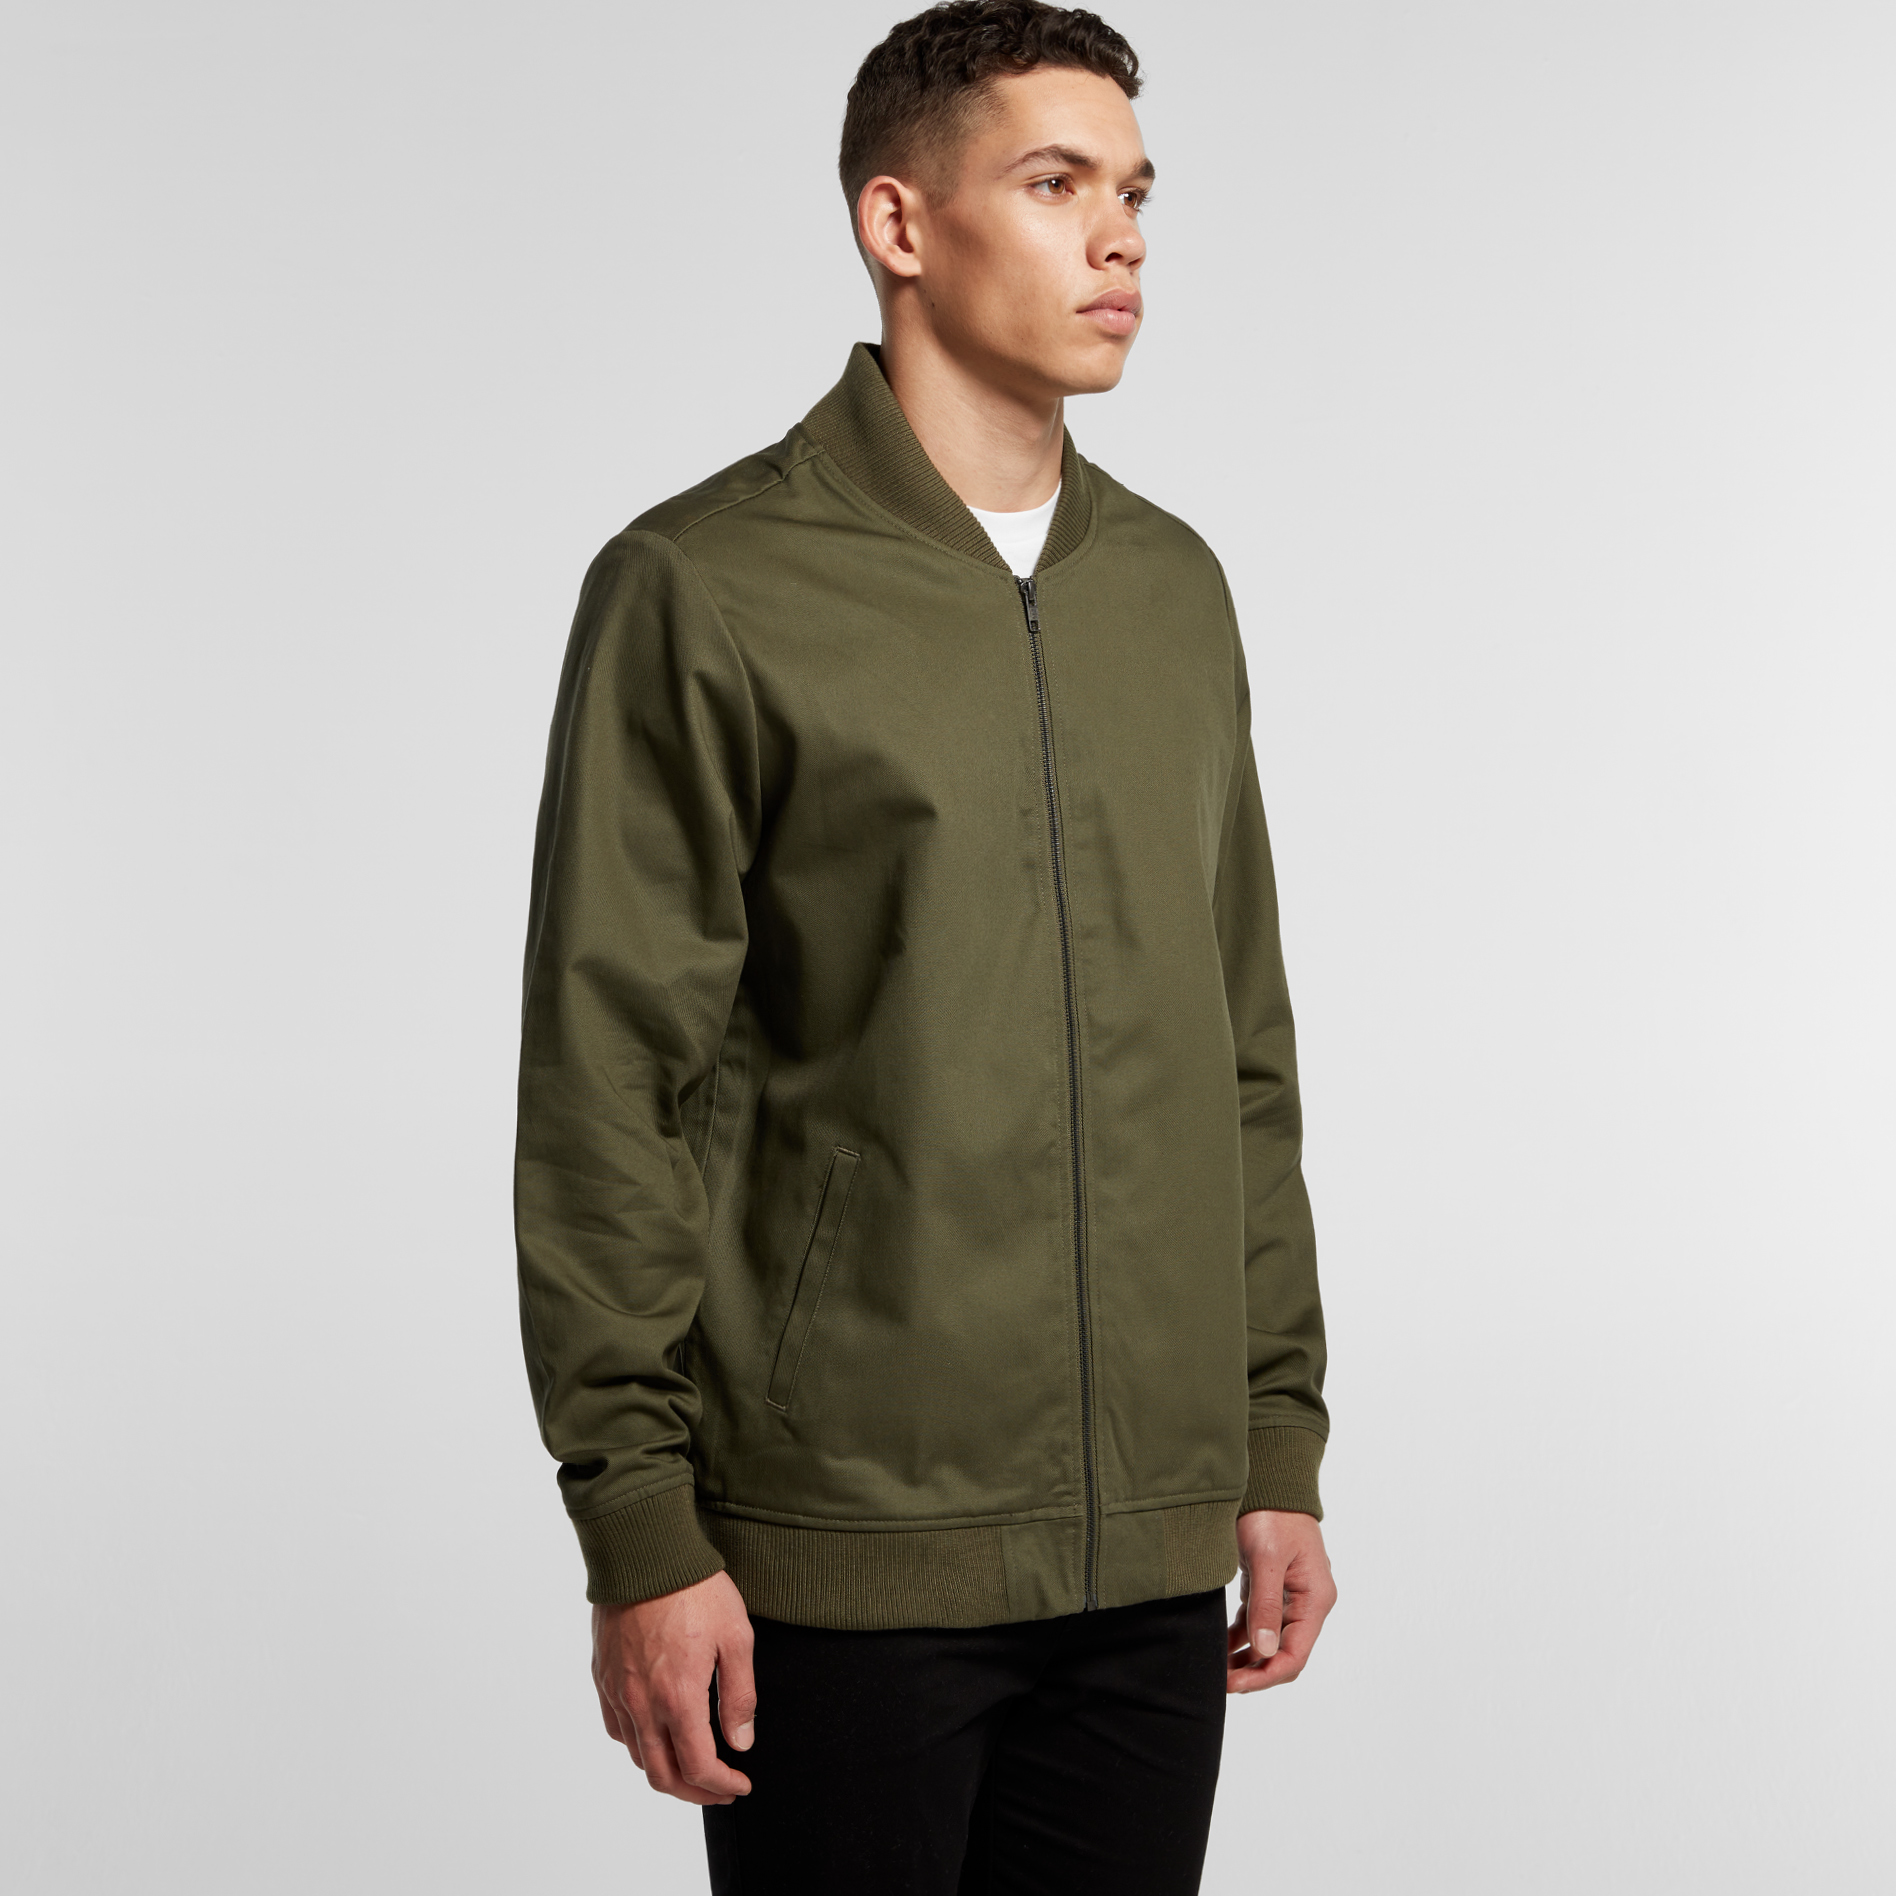 Mens Bomber Jacket | AS Colour | Withers and Co